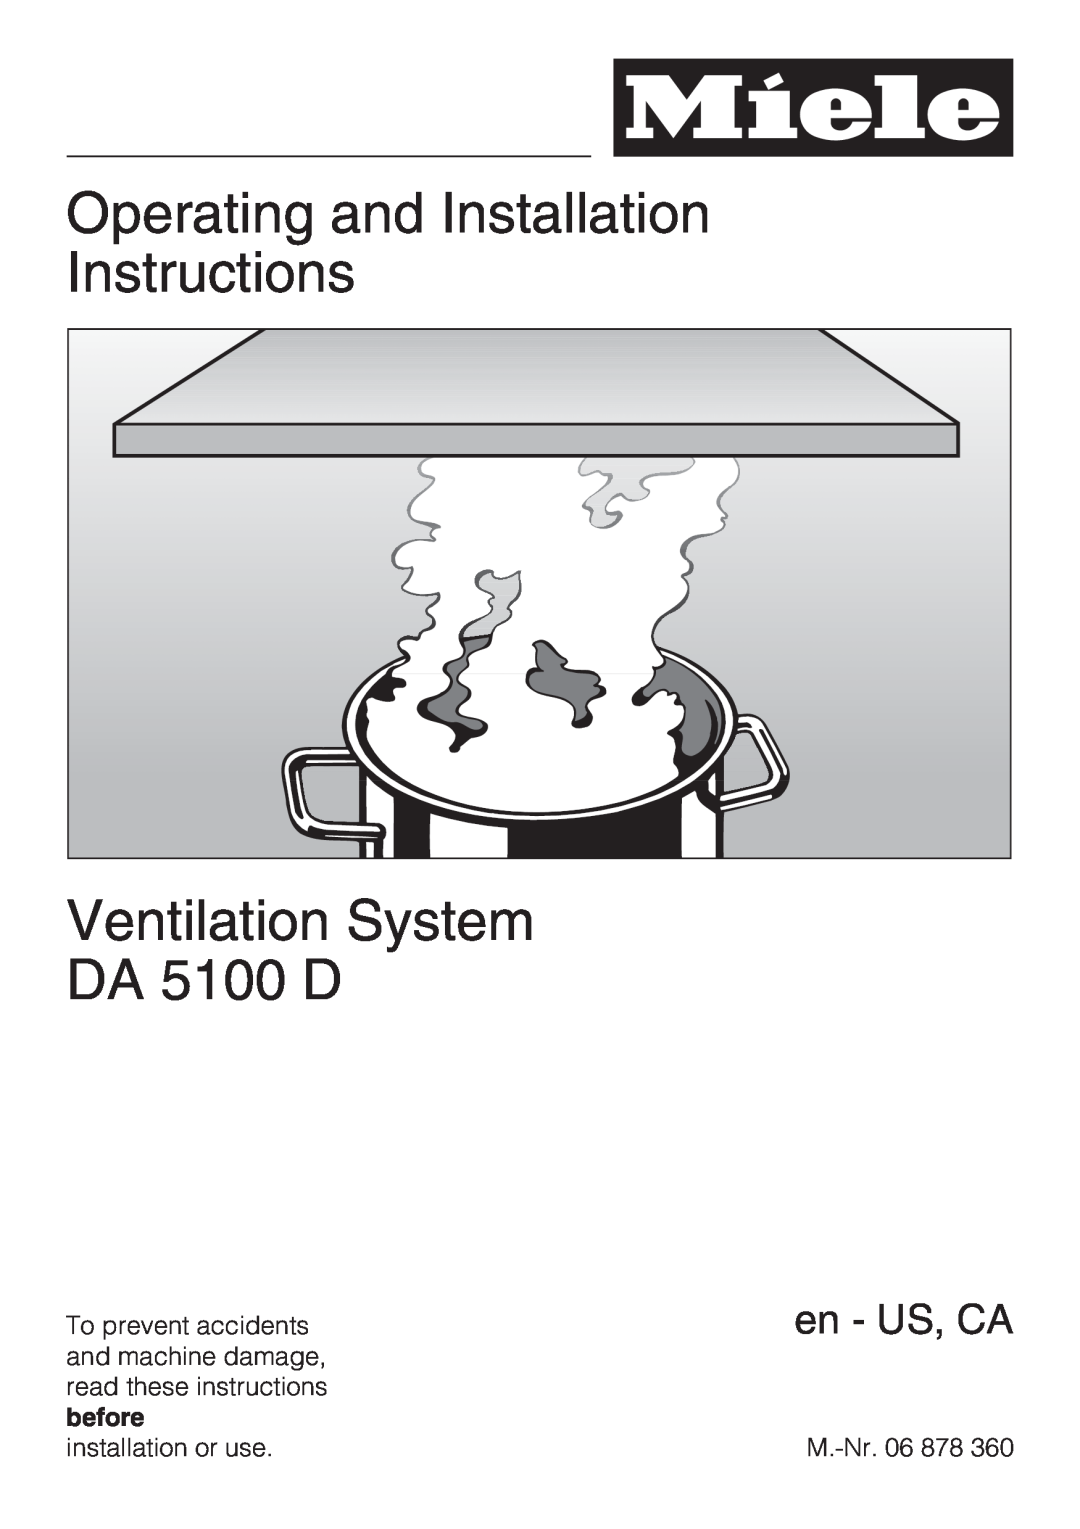 Miele installation instructions Operating and Installation Instructions, Ventilation System DA 5100 D, en - US, CA 